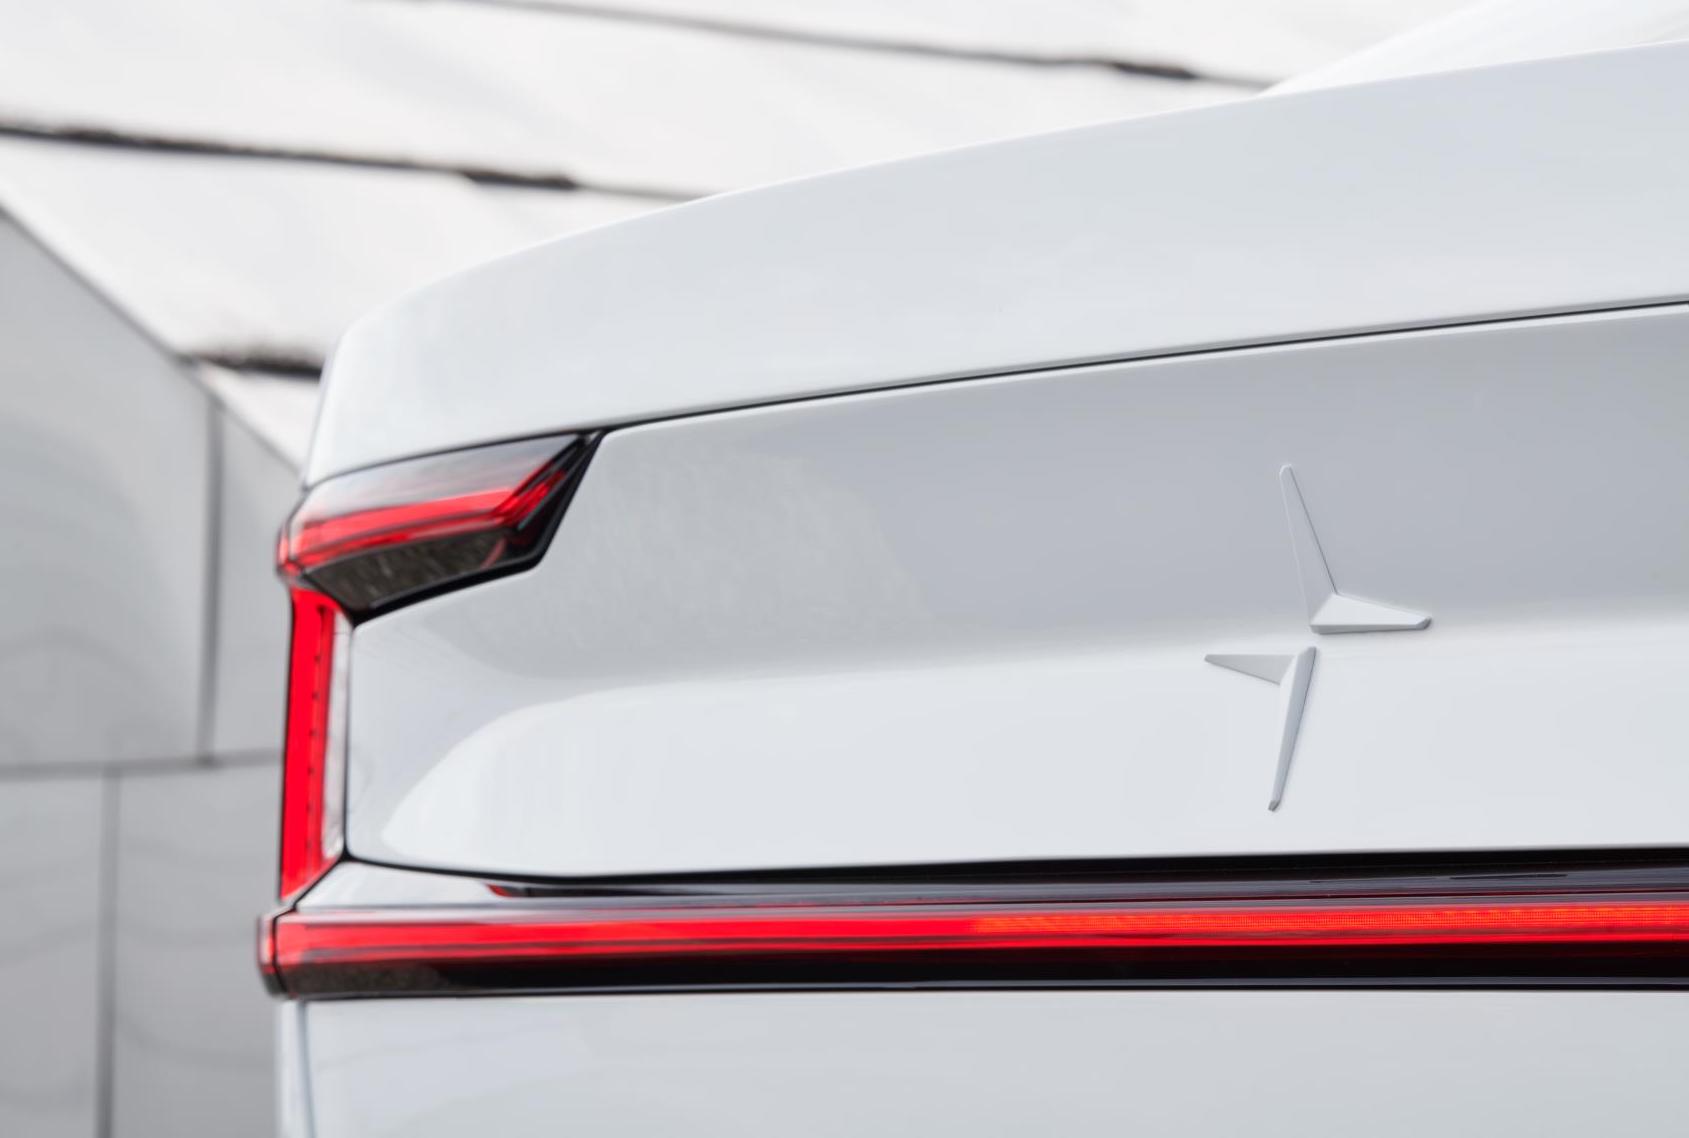 Polestar 2 previewed ahead online reveal on February 27